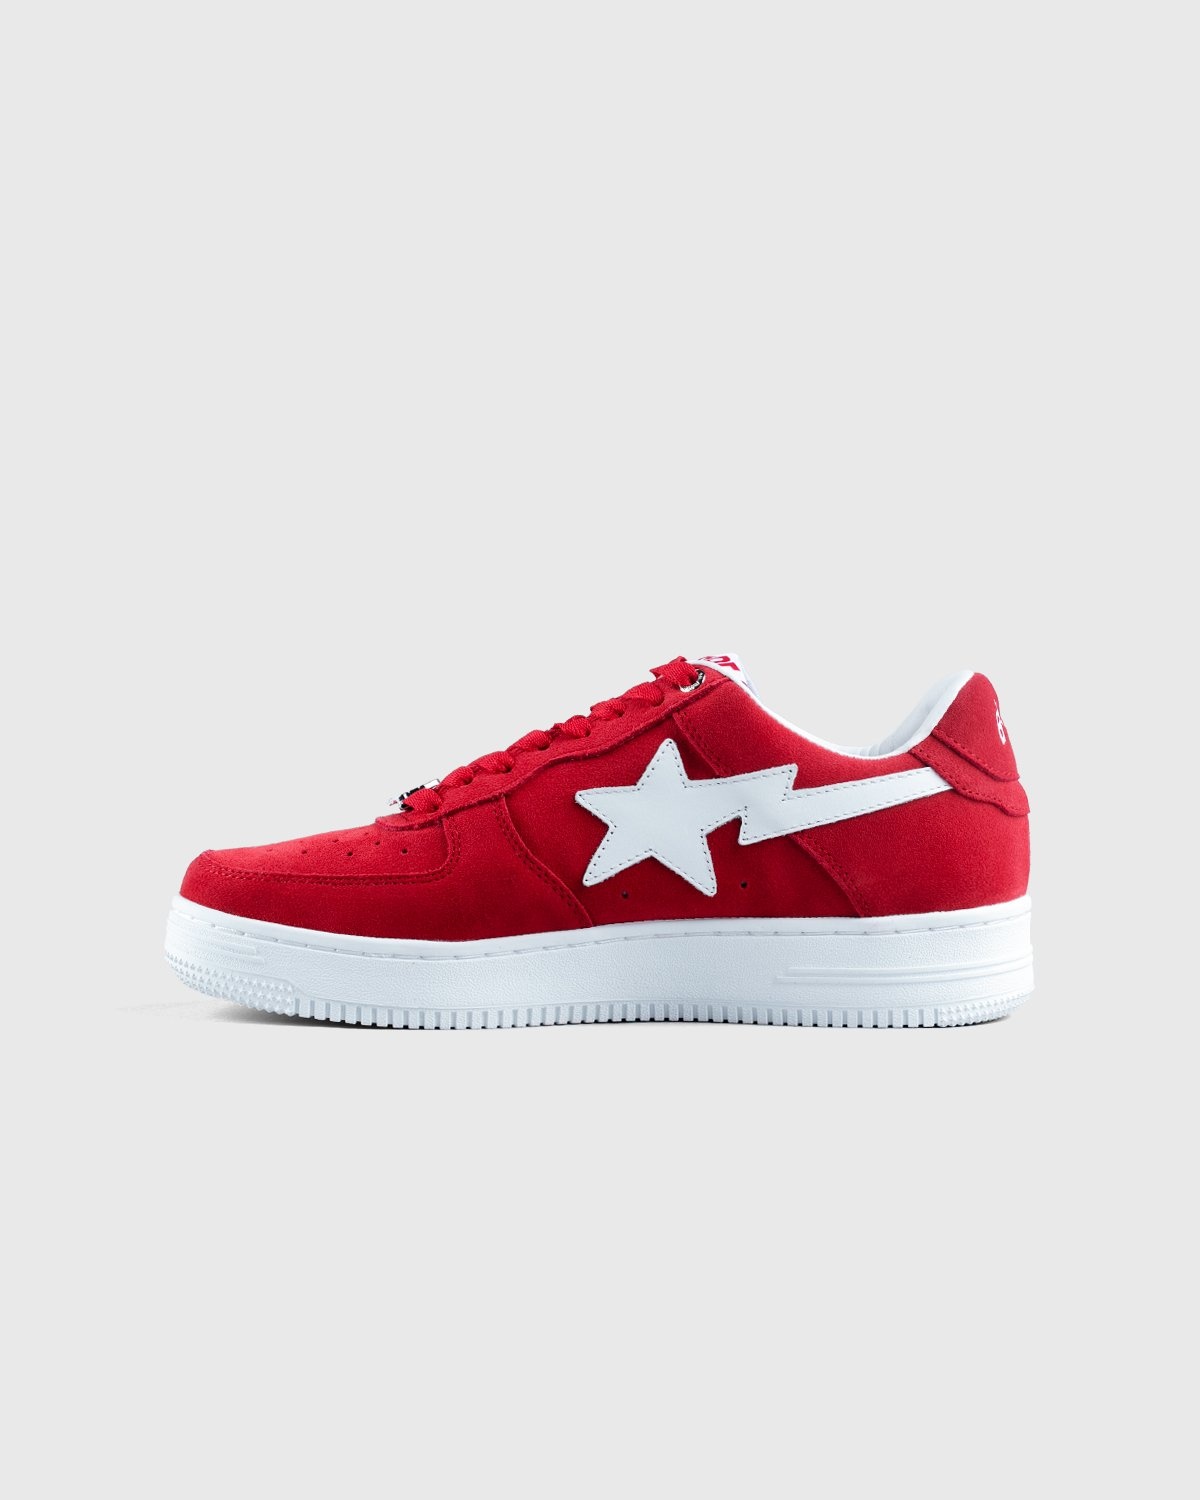 BAPE x Highsnobiety – BAPE STA Red - Sneakers - Red - Image 4